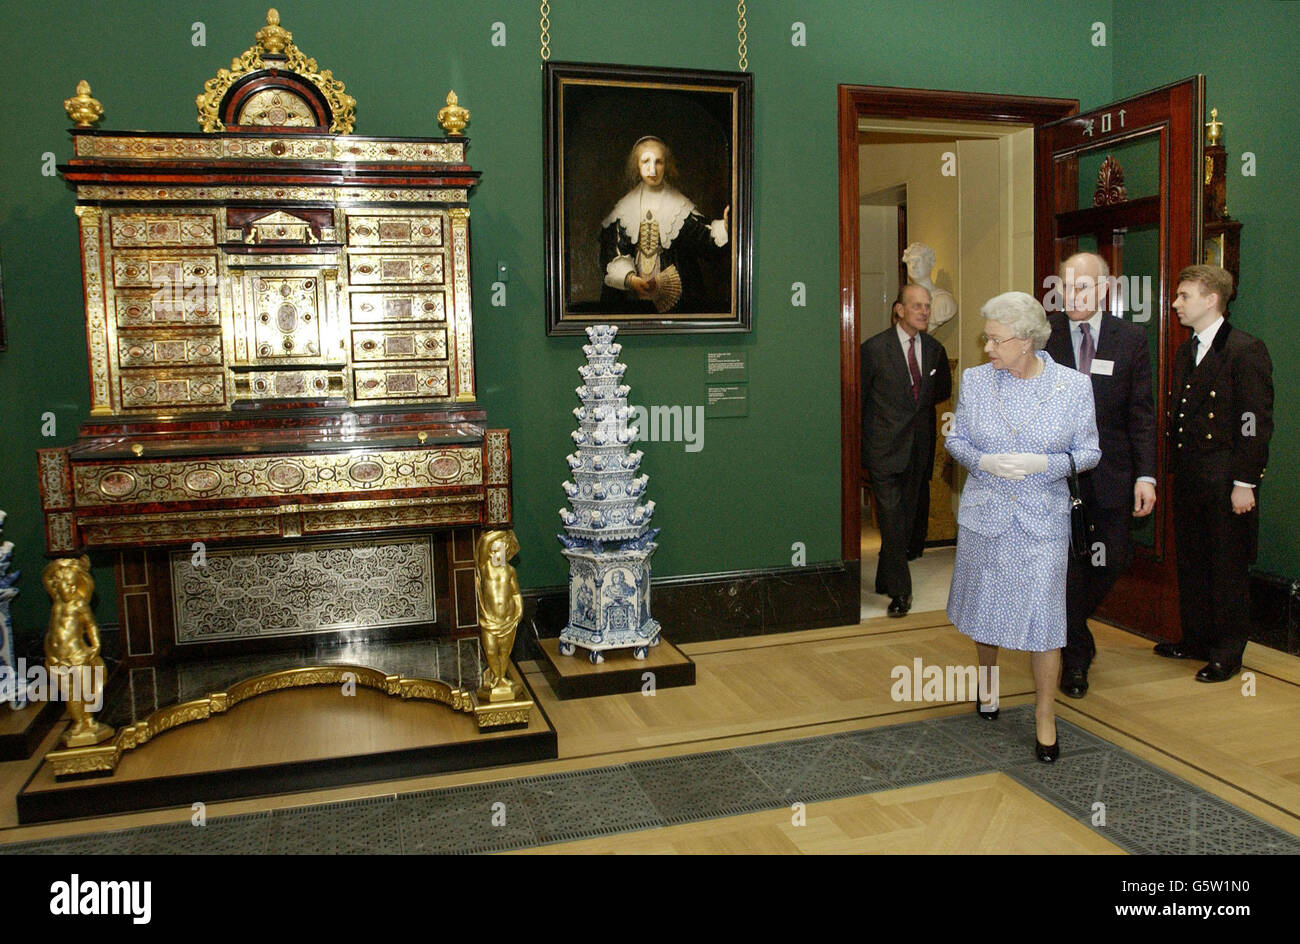 Queen Elizabeth II views a recently restored Rembrandt, 'Agatha Bas', and a Boulle secretaire -cabinet dated around 1700, on display in the newly expanded Queen's Gallery at Buckingham Palace, London. *110603*Britain's Queen Elizabeth II viewing a recently restored Rembrandt, 'Agatha Bas', and a Boulle secretaire cabinet dated around 1700, on display in the Queen's Gallery at Buckingham Palace, London, which has been named, Wednesday 11 June, 2003, as the winner of the Gallery of the Year Award in the Royal Fine Art Commission Trust/British Sky Broadcasting Building of the Year Awards. Stock Photo